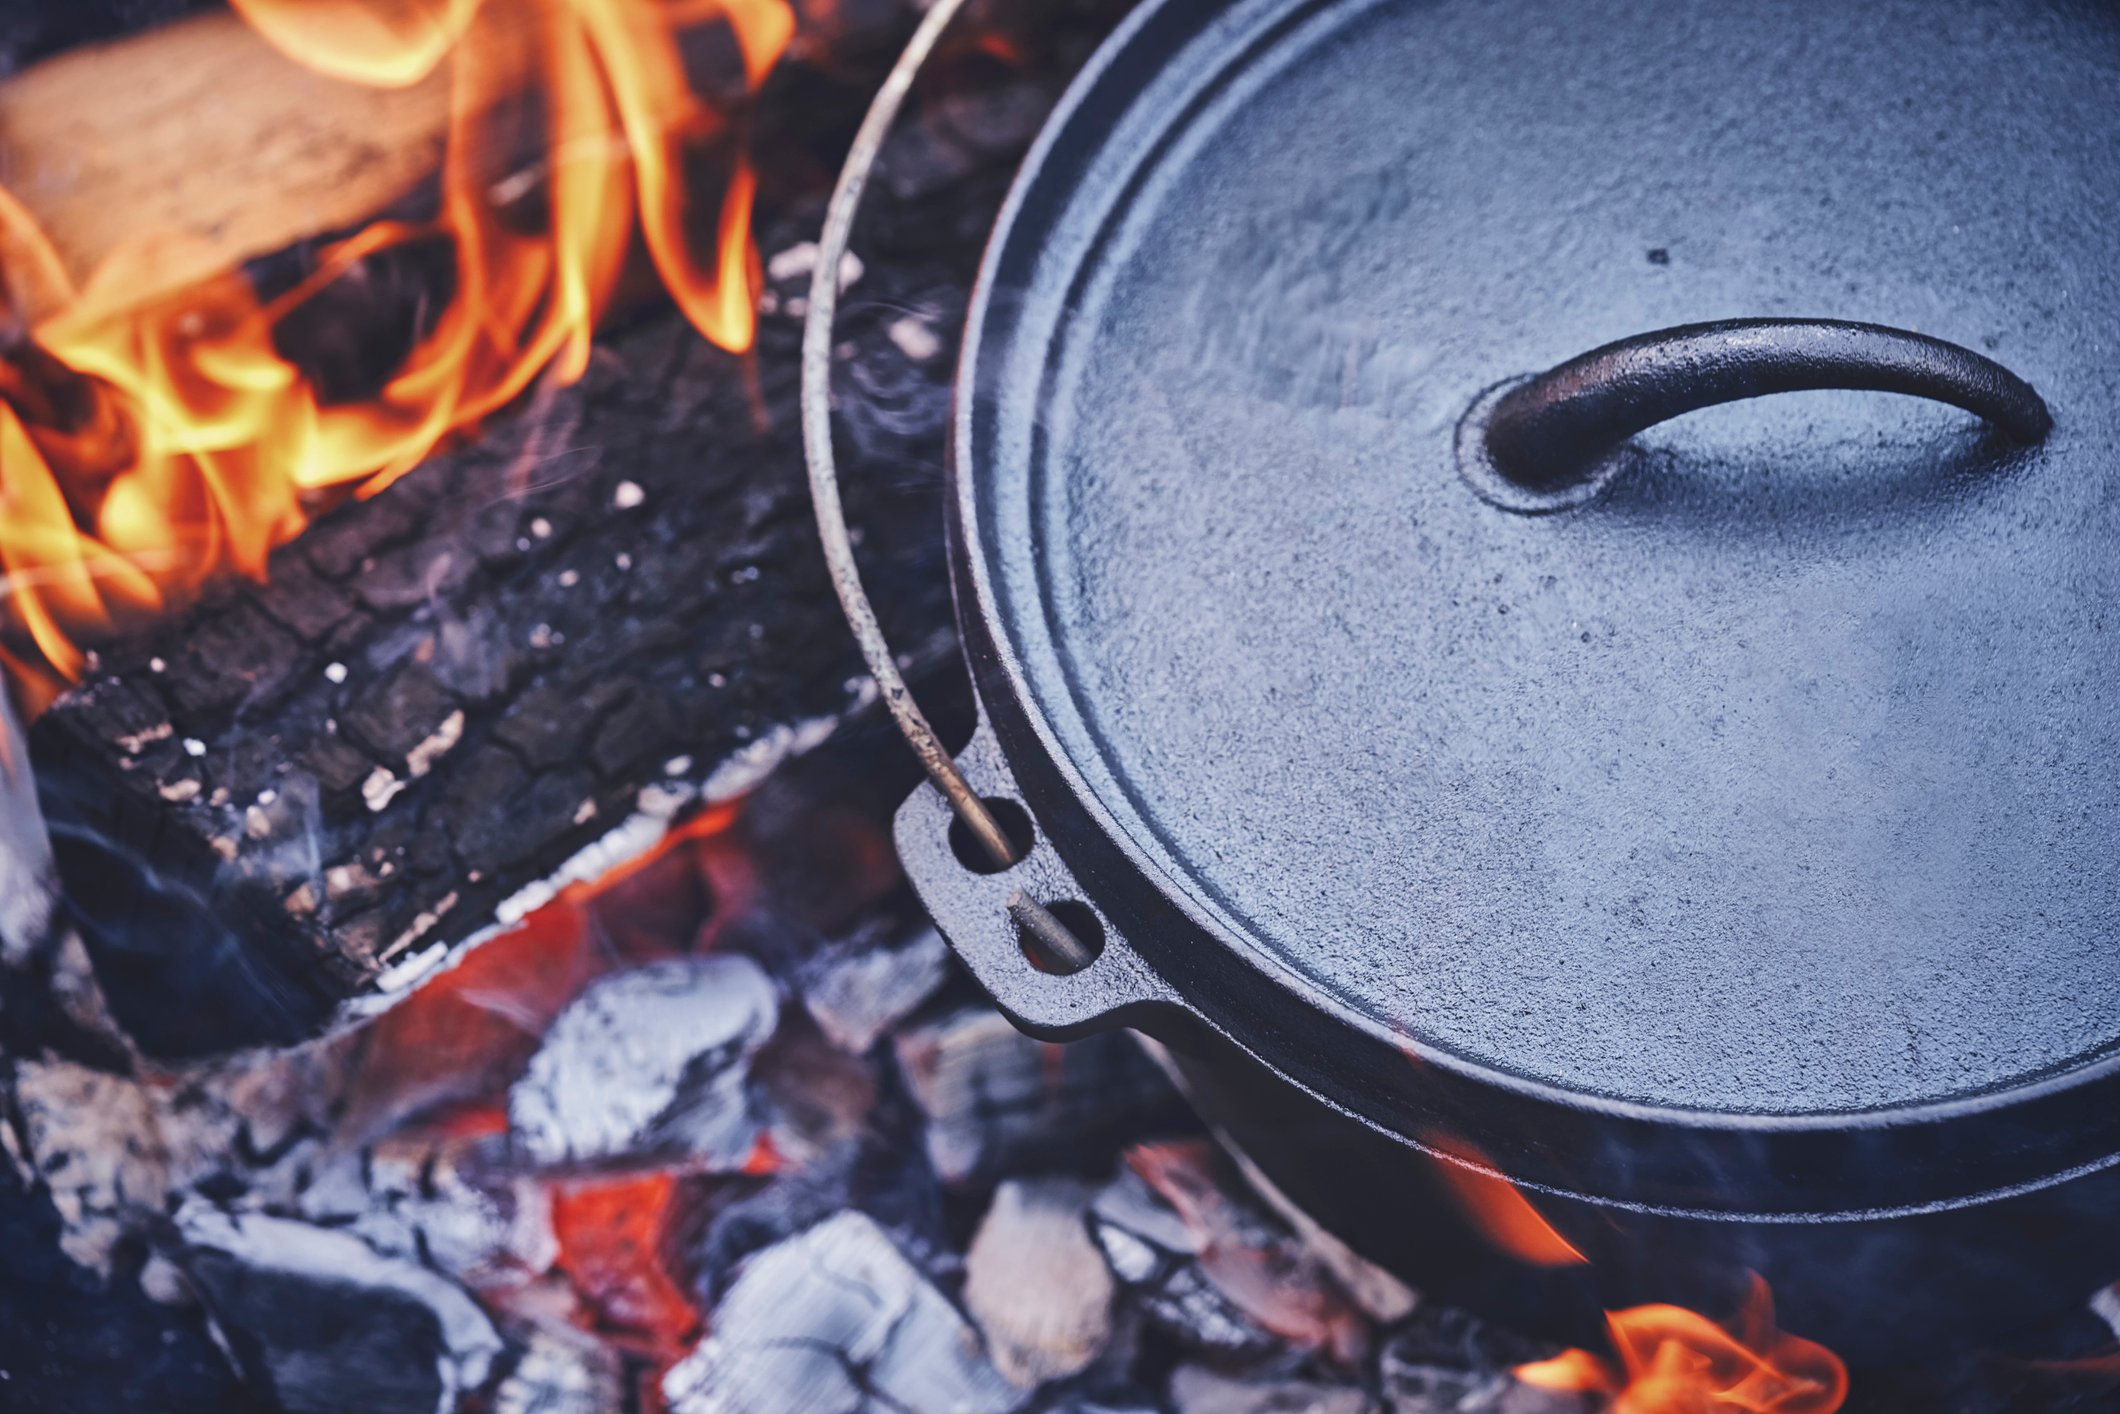 Cooking Without Power: An Introduction to Dutch Ovens